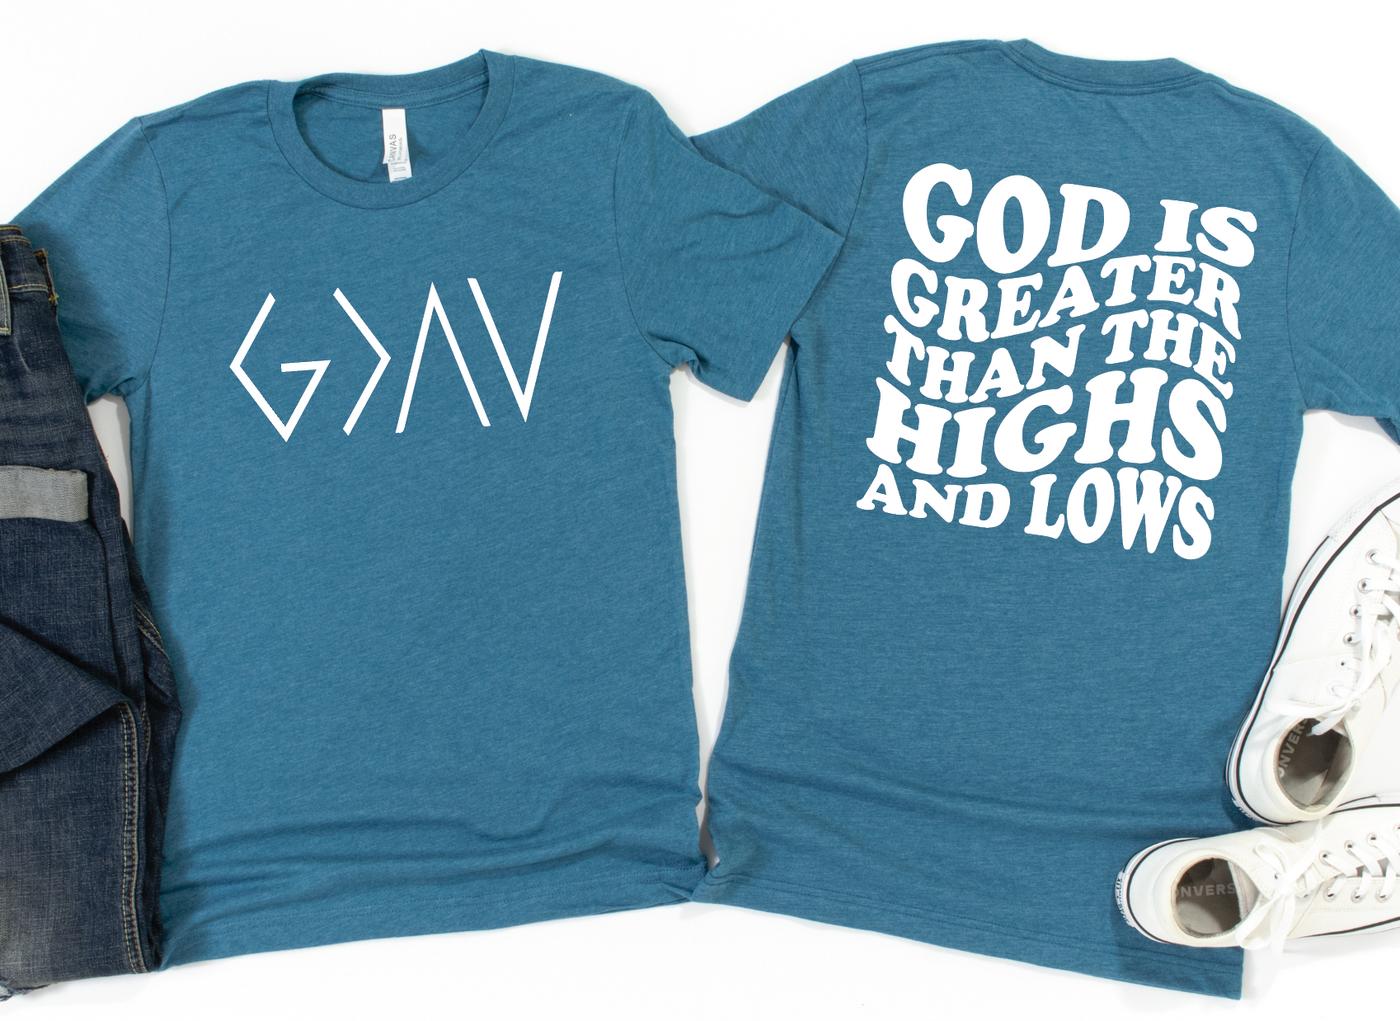 God Is Greater Than the Highs and Lows Tee